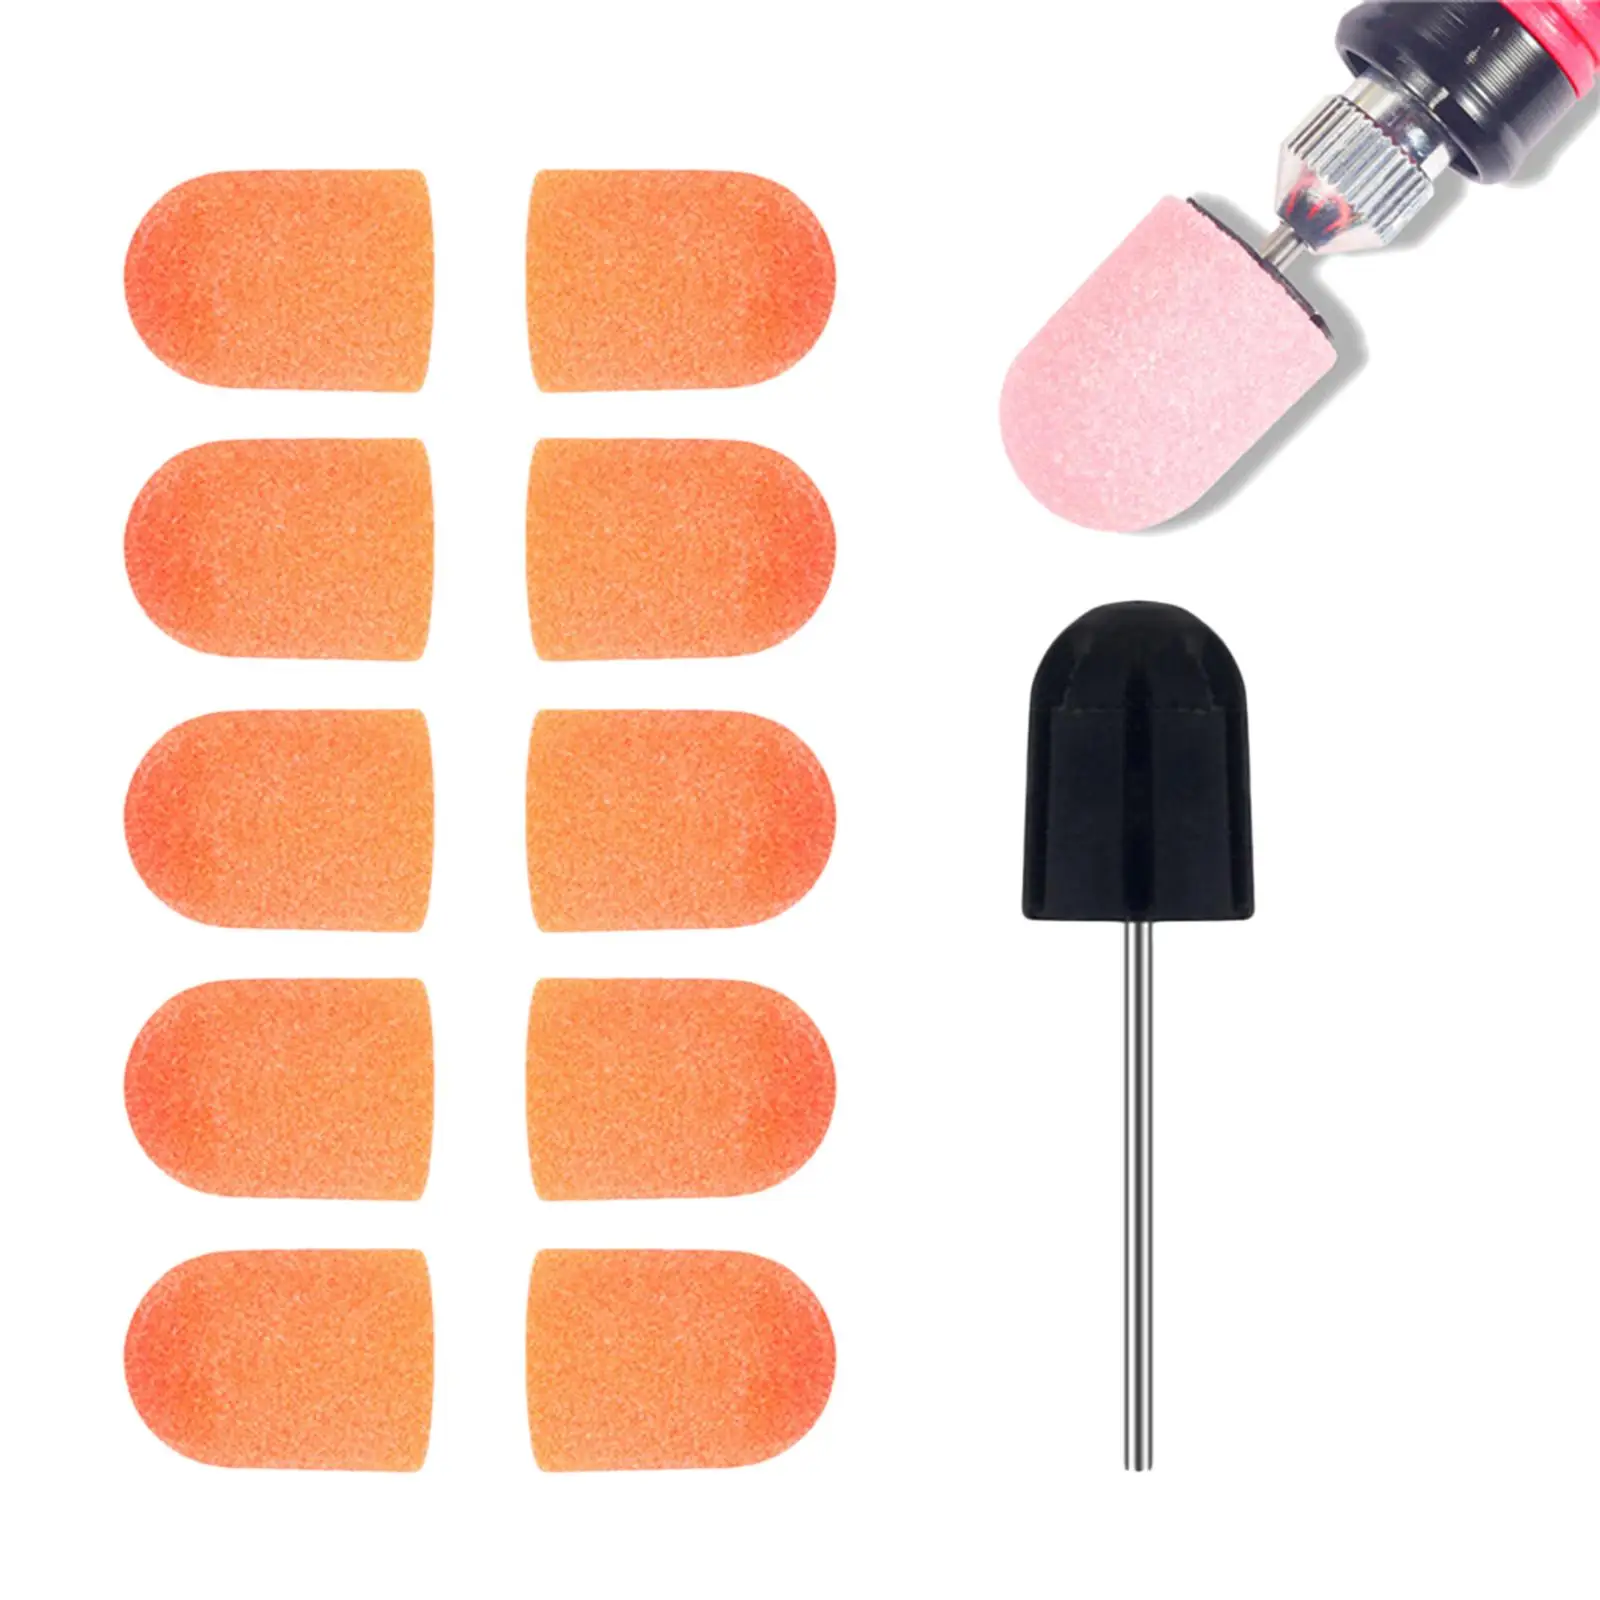 Nail Sanding Caps Bands Professional Sanding Grinding Head for Remover